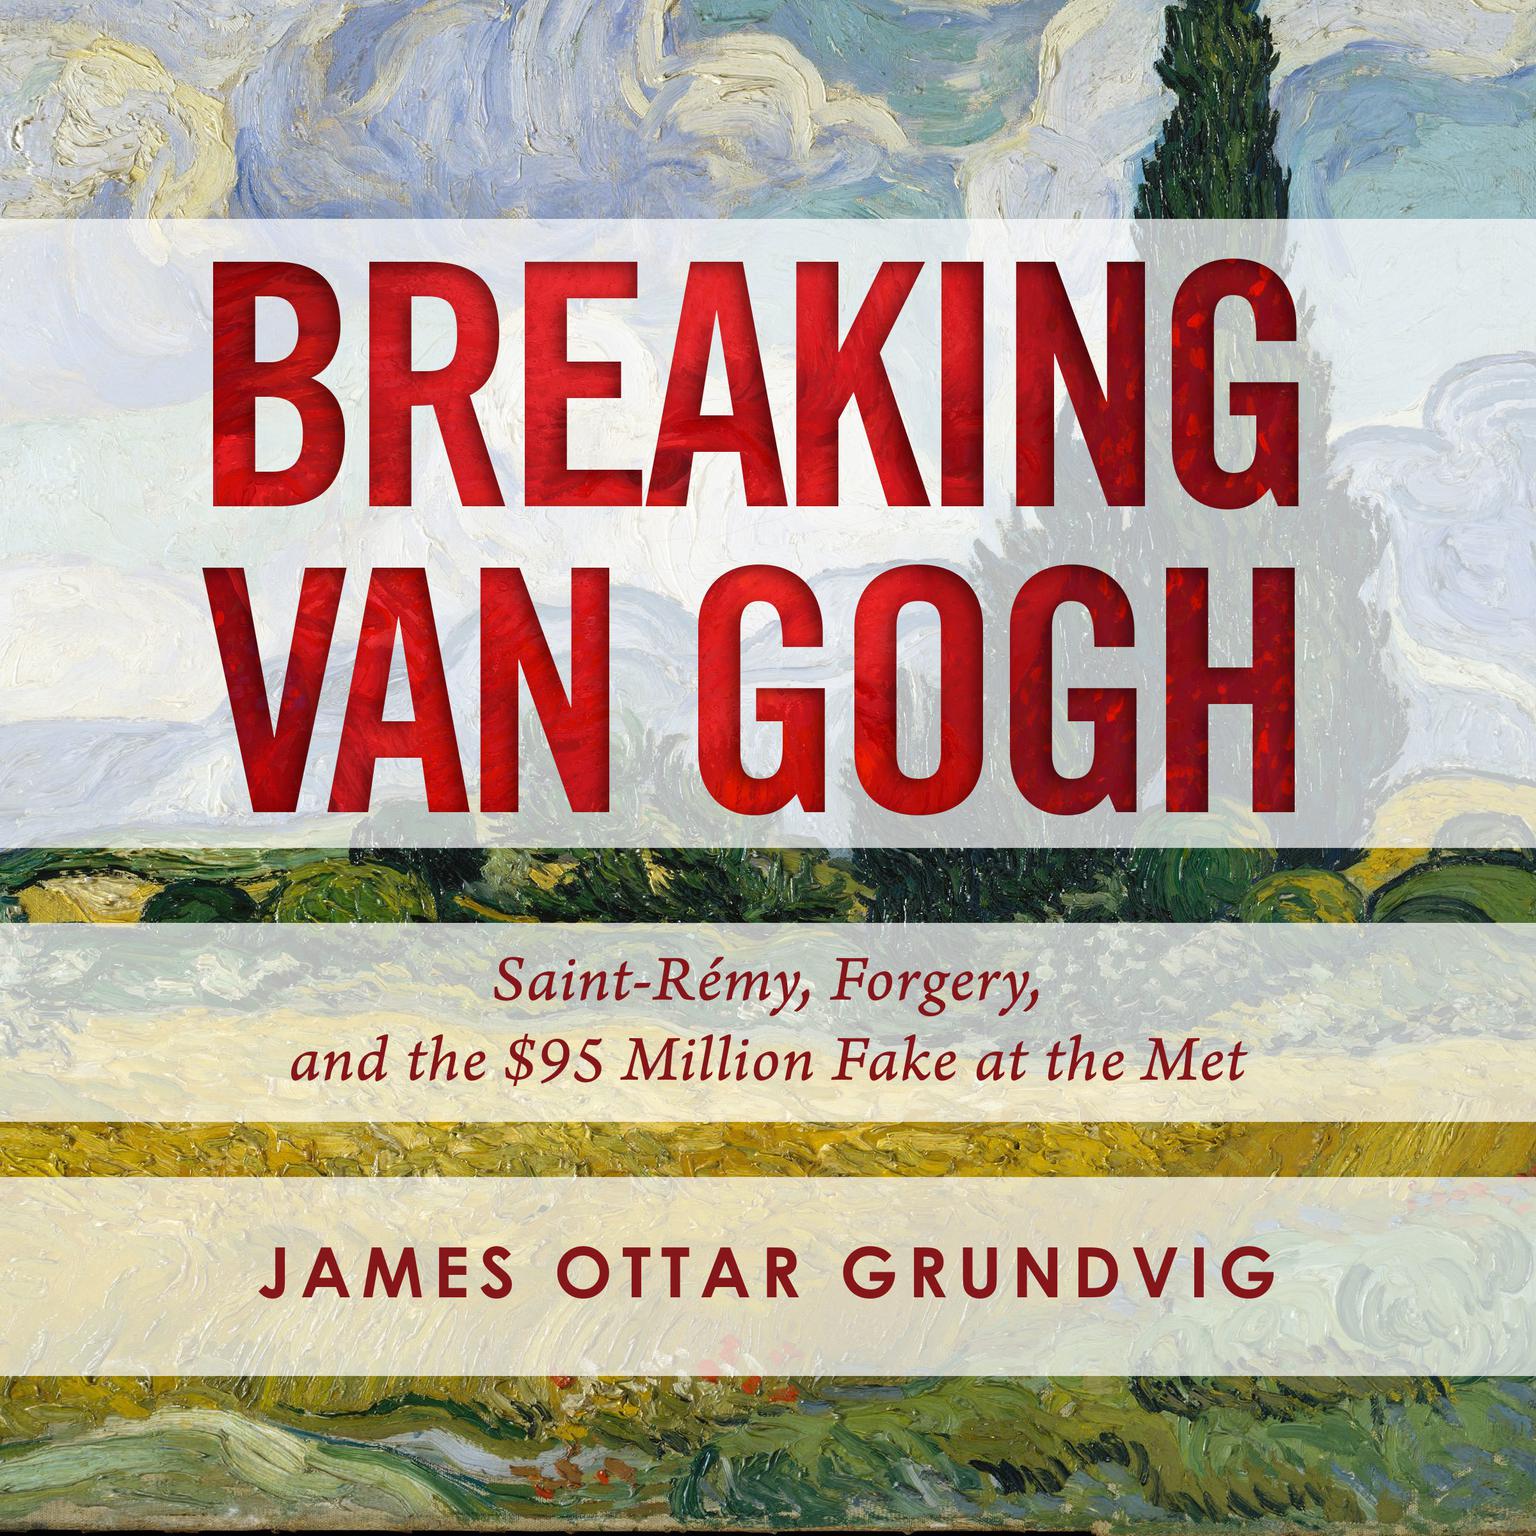 Breaking van Gogh: Saint-Rémy, Forgery, and the $95 Million Fake at the Met Audiobook, by James Ottar Grundvig